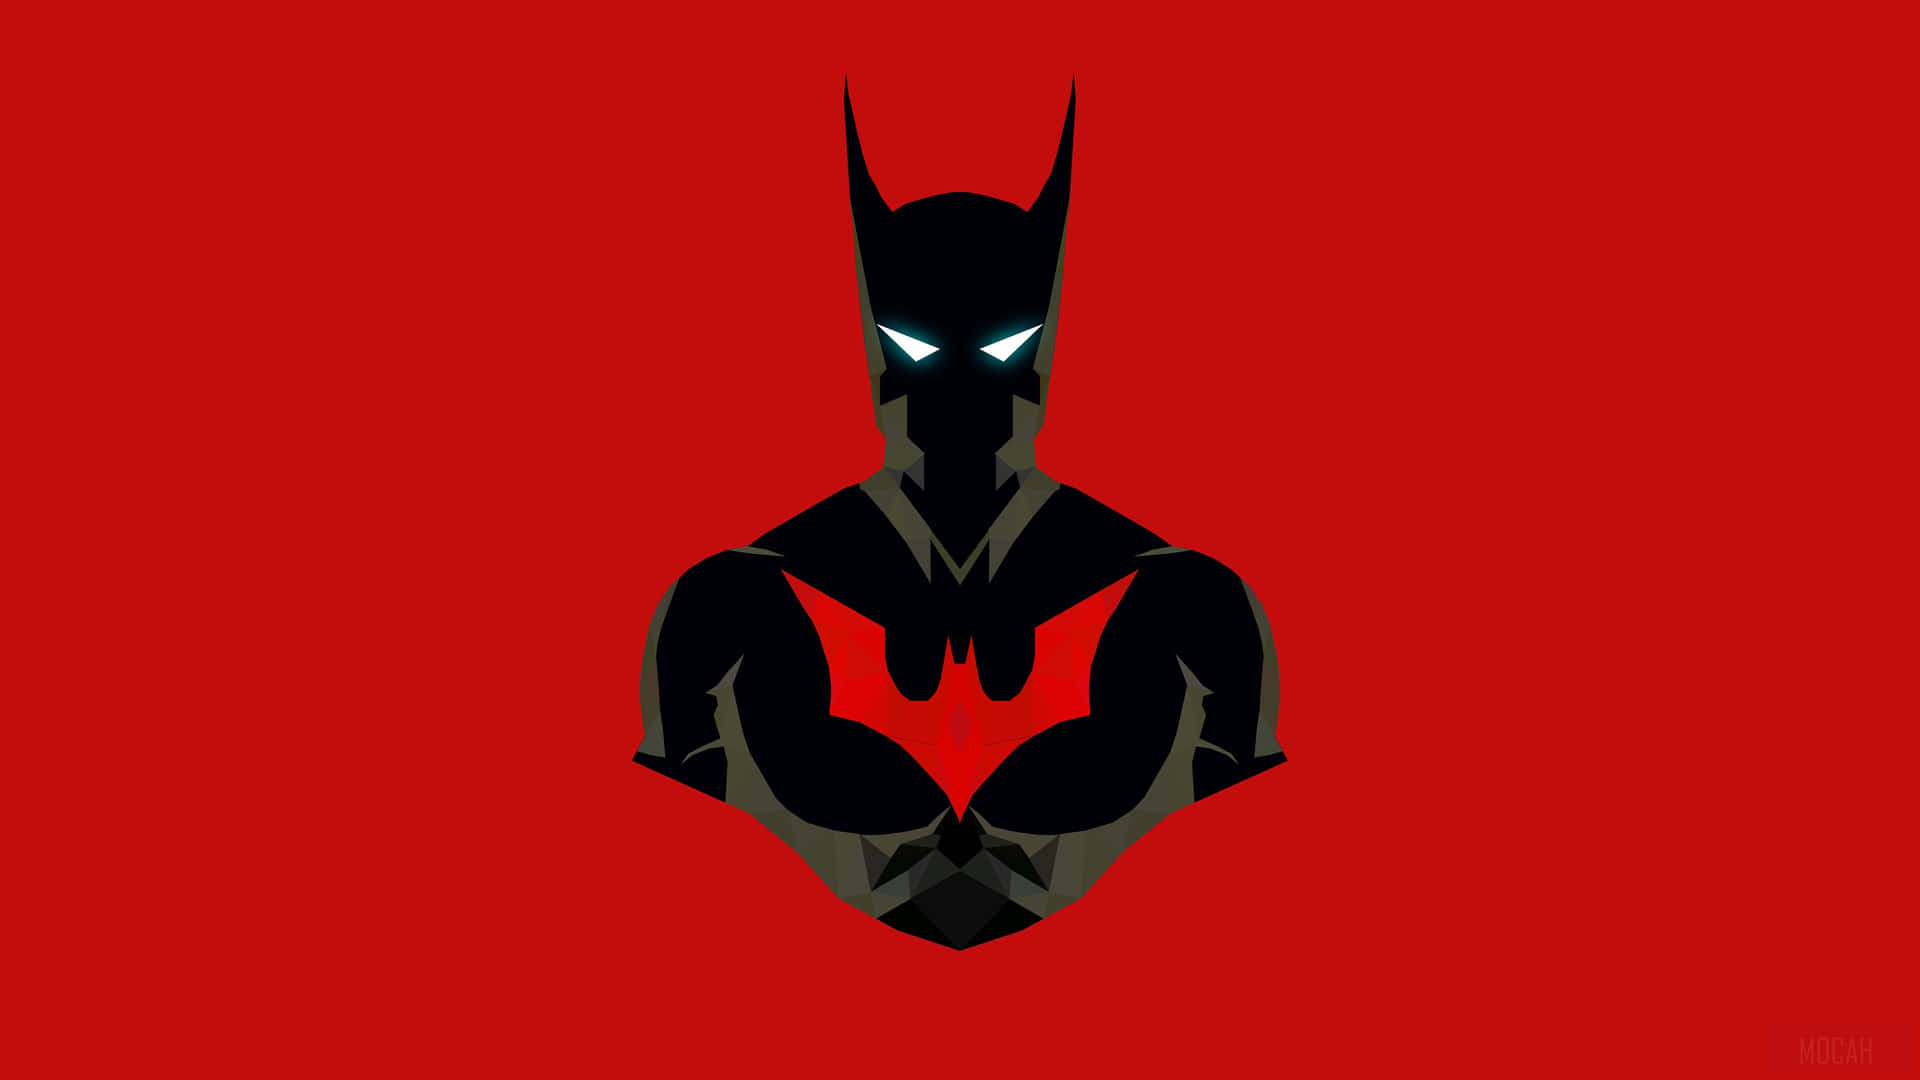 Batman Beyond - One of the most iconic superheroes of all time